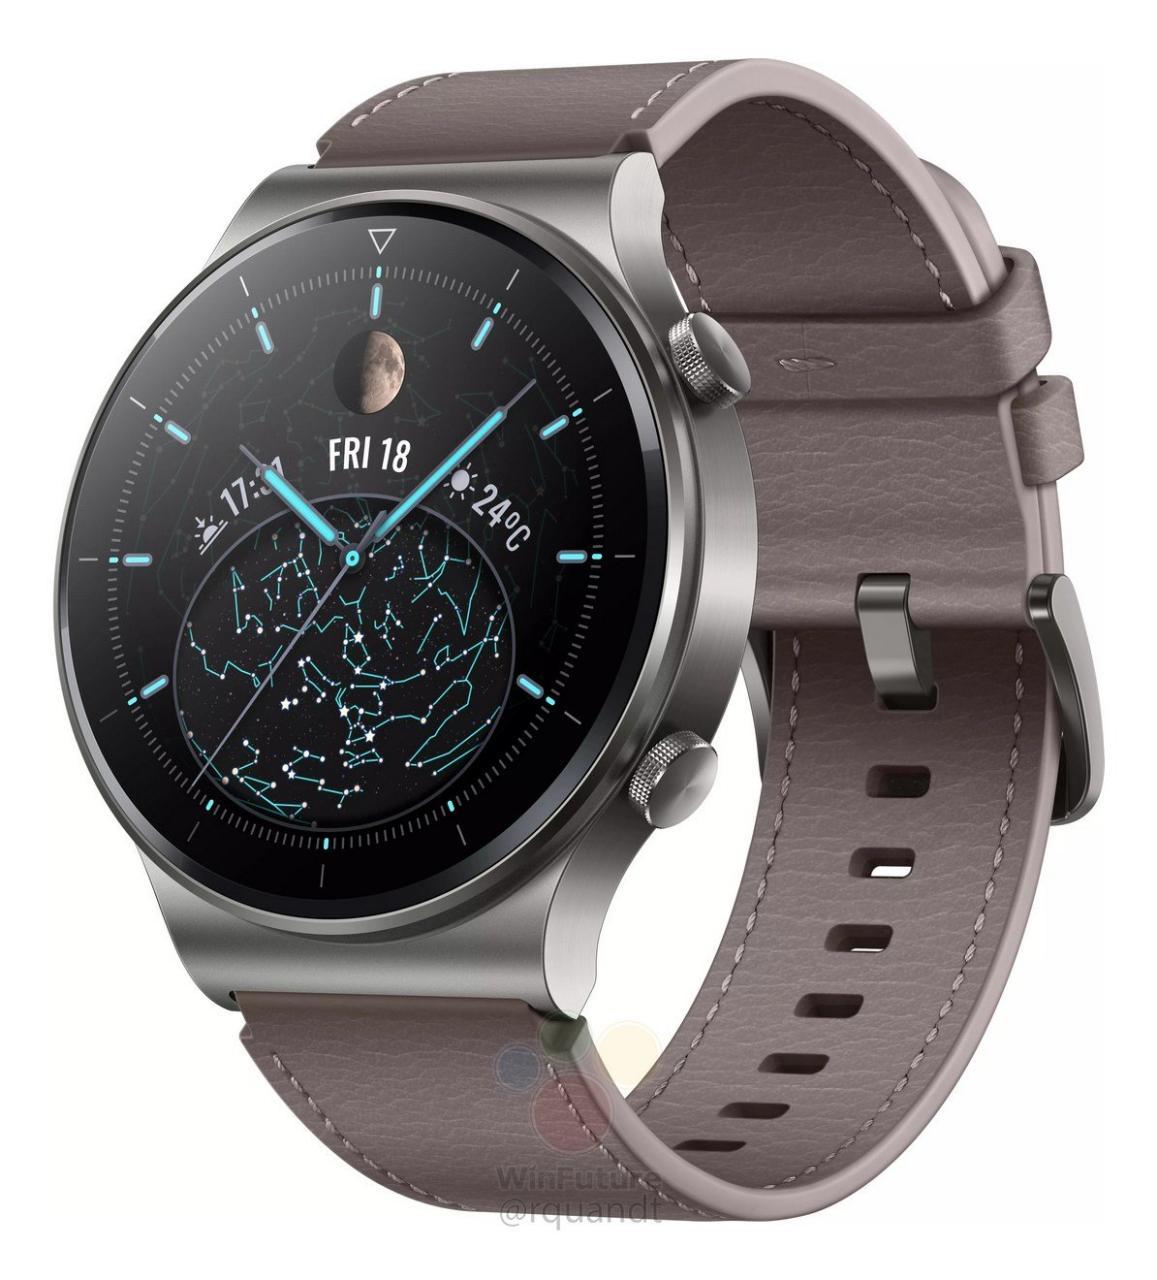 Here are the details and renders of Huawei Watch GT 2 Pro